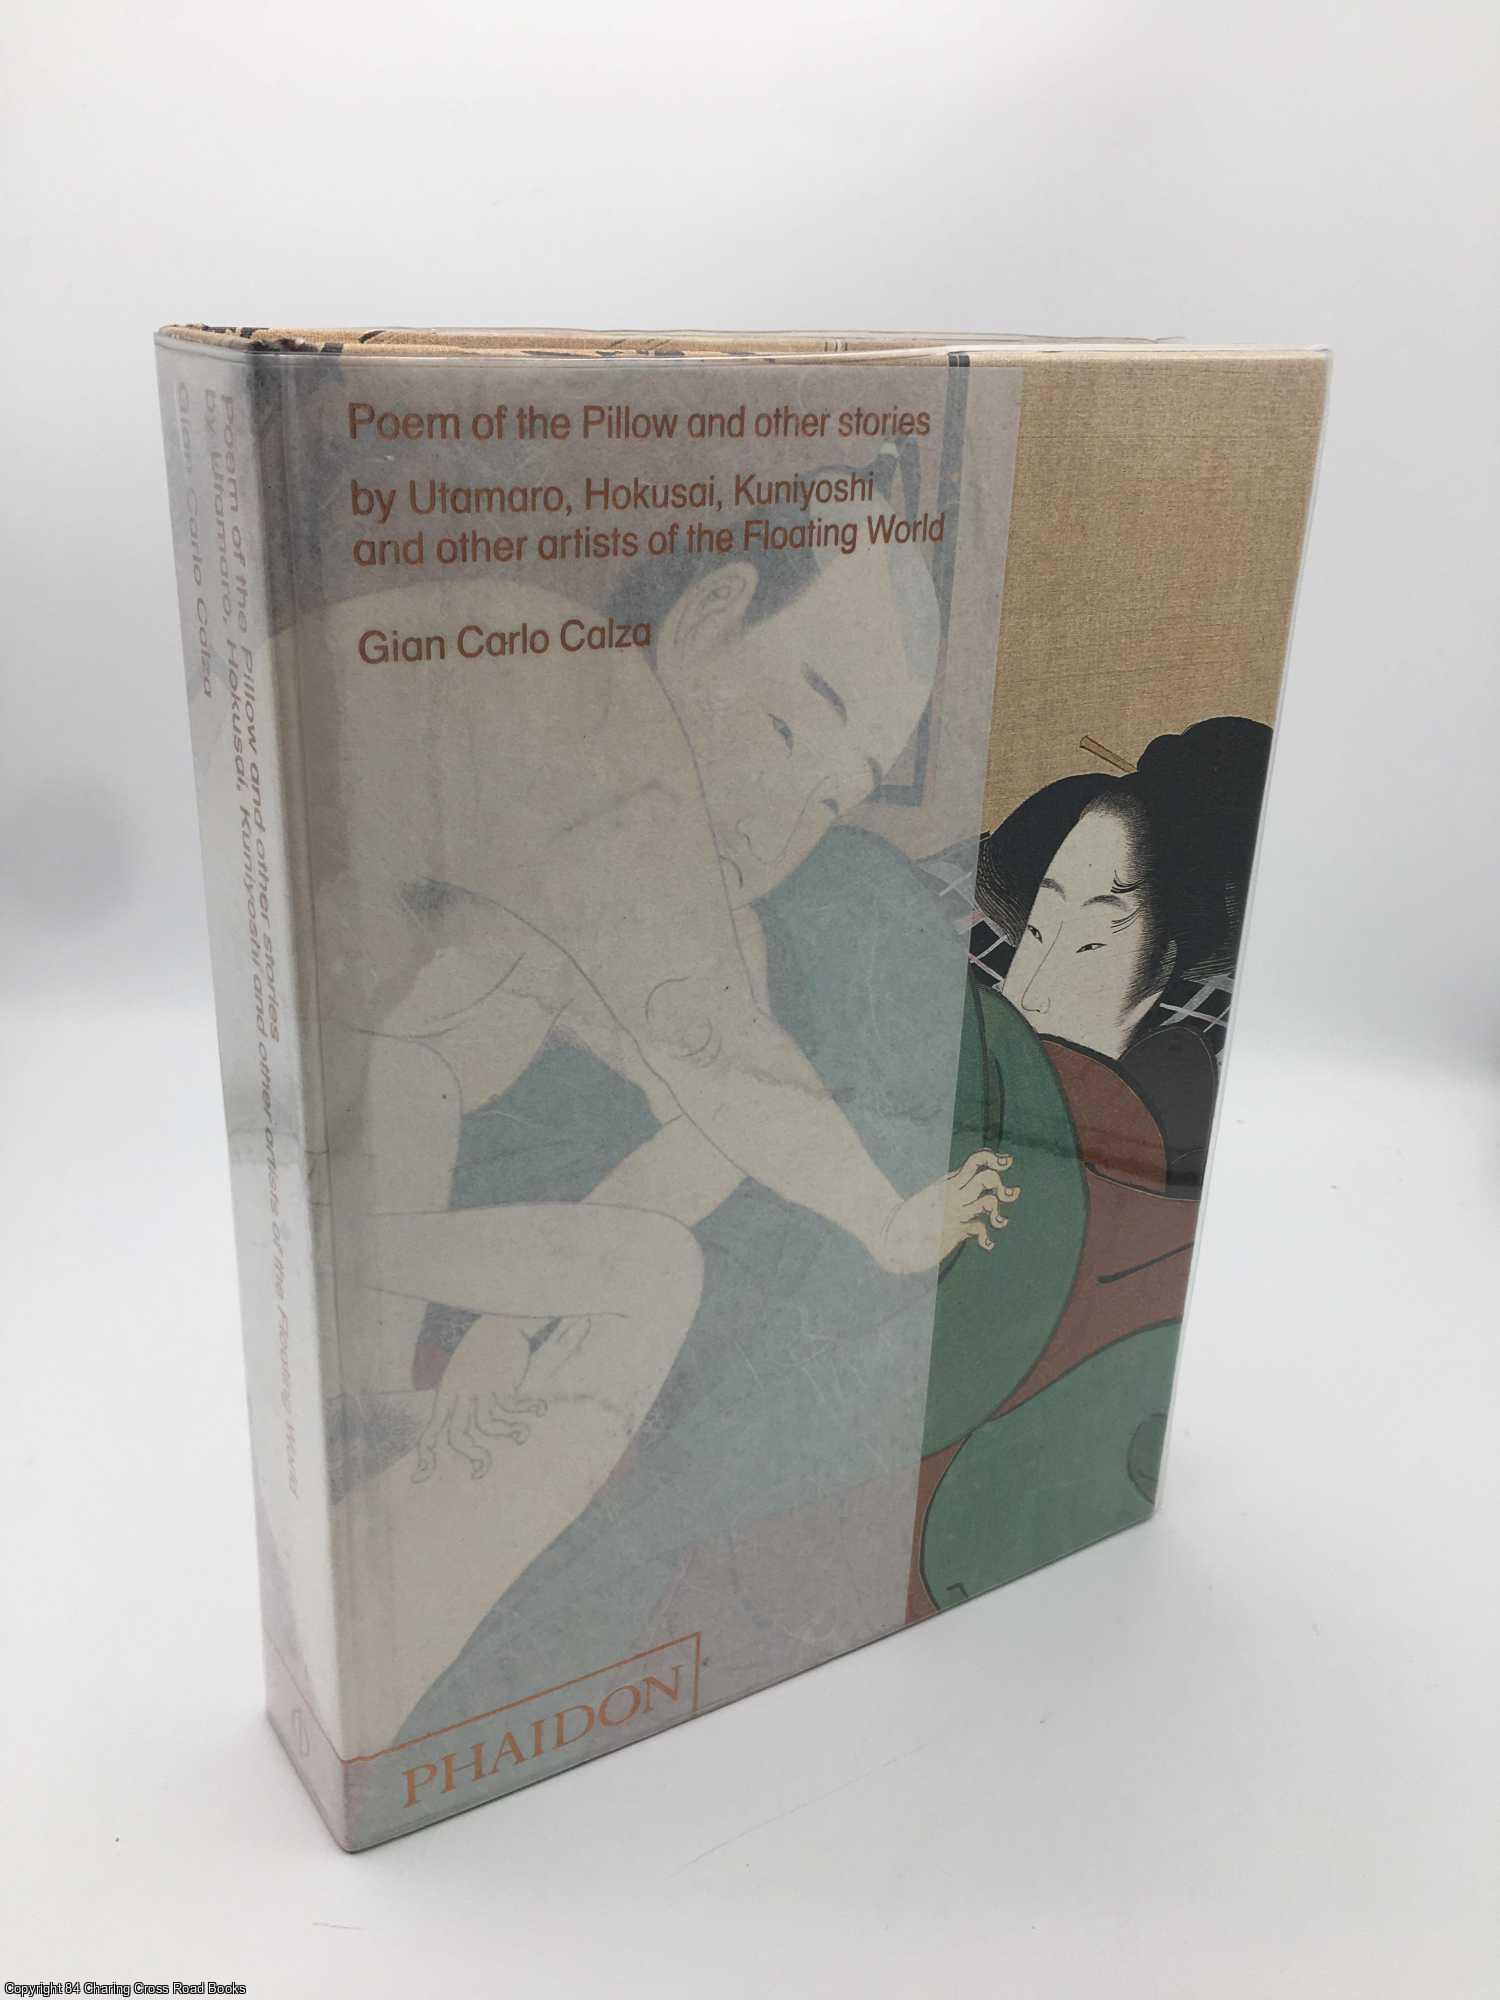 Calza, Gian Carlo - Poem of the Pillow and Other Stories By Utamaro, Hokusai, Kuniyoshi, and Other Artists of the Floating World